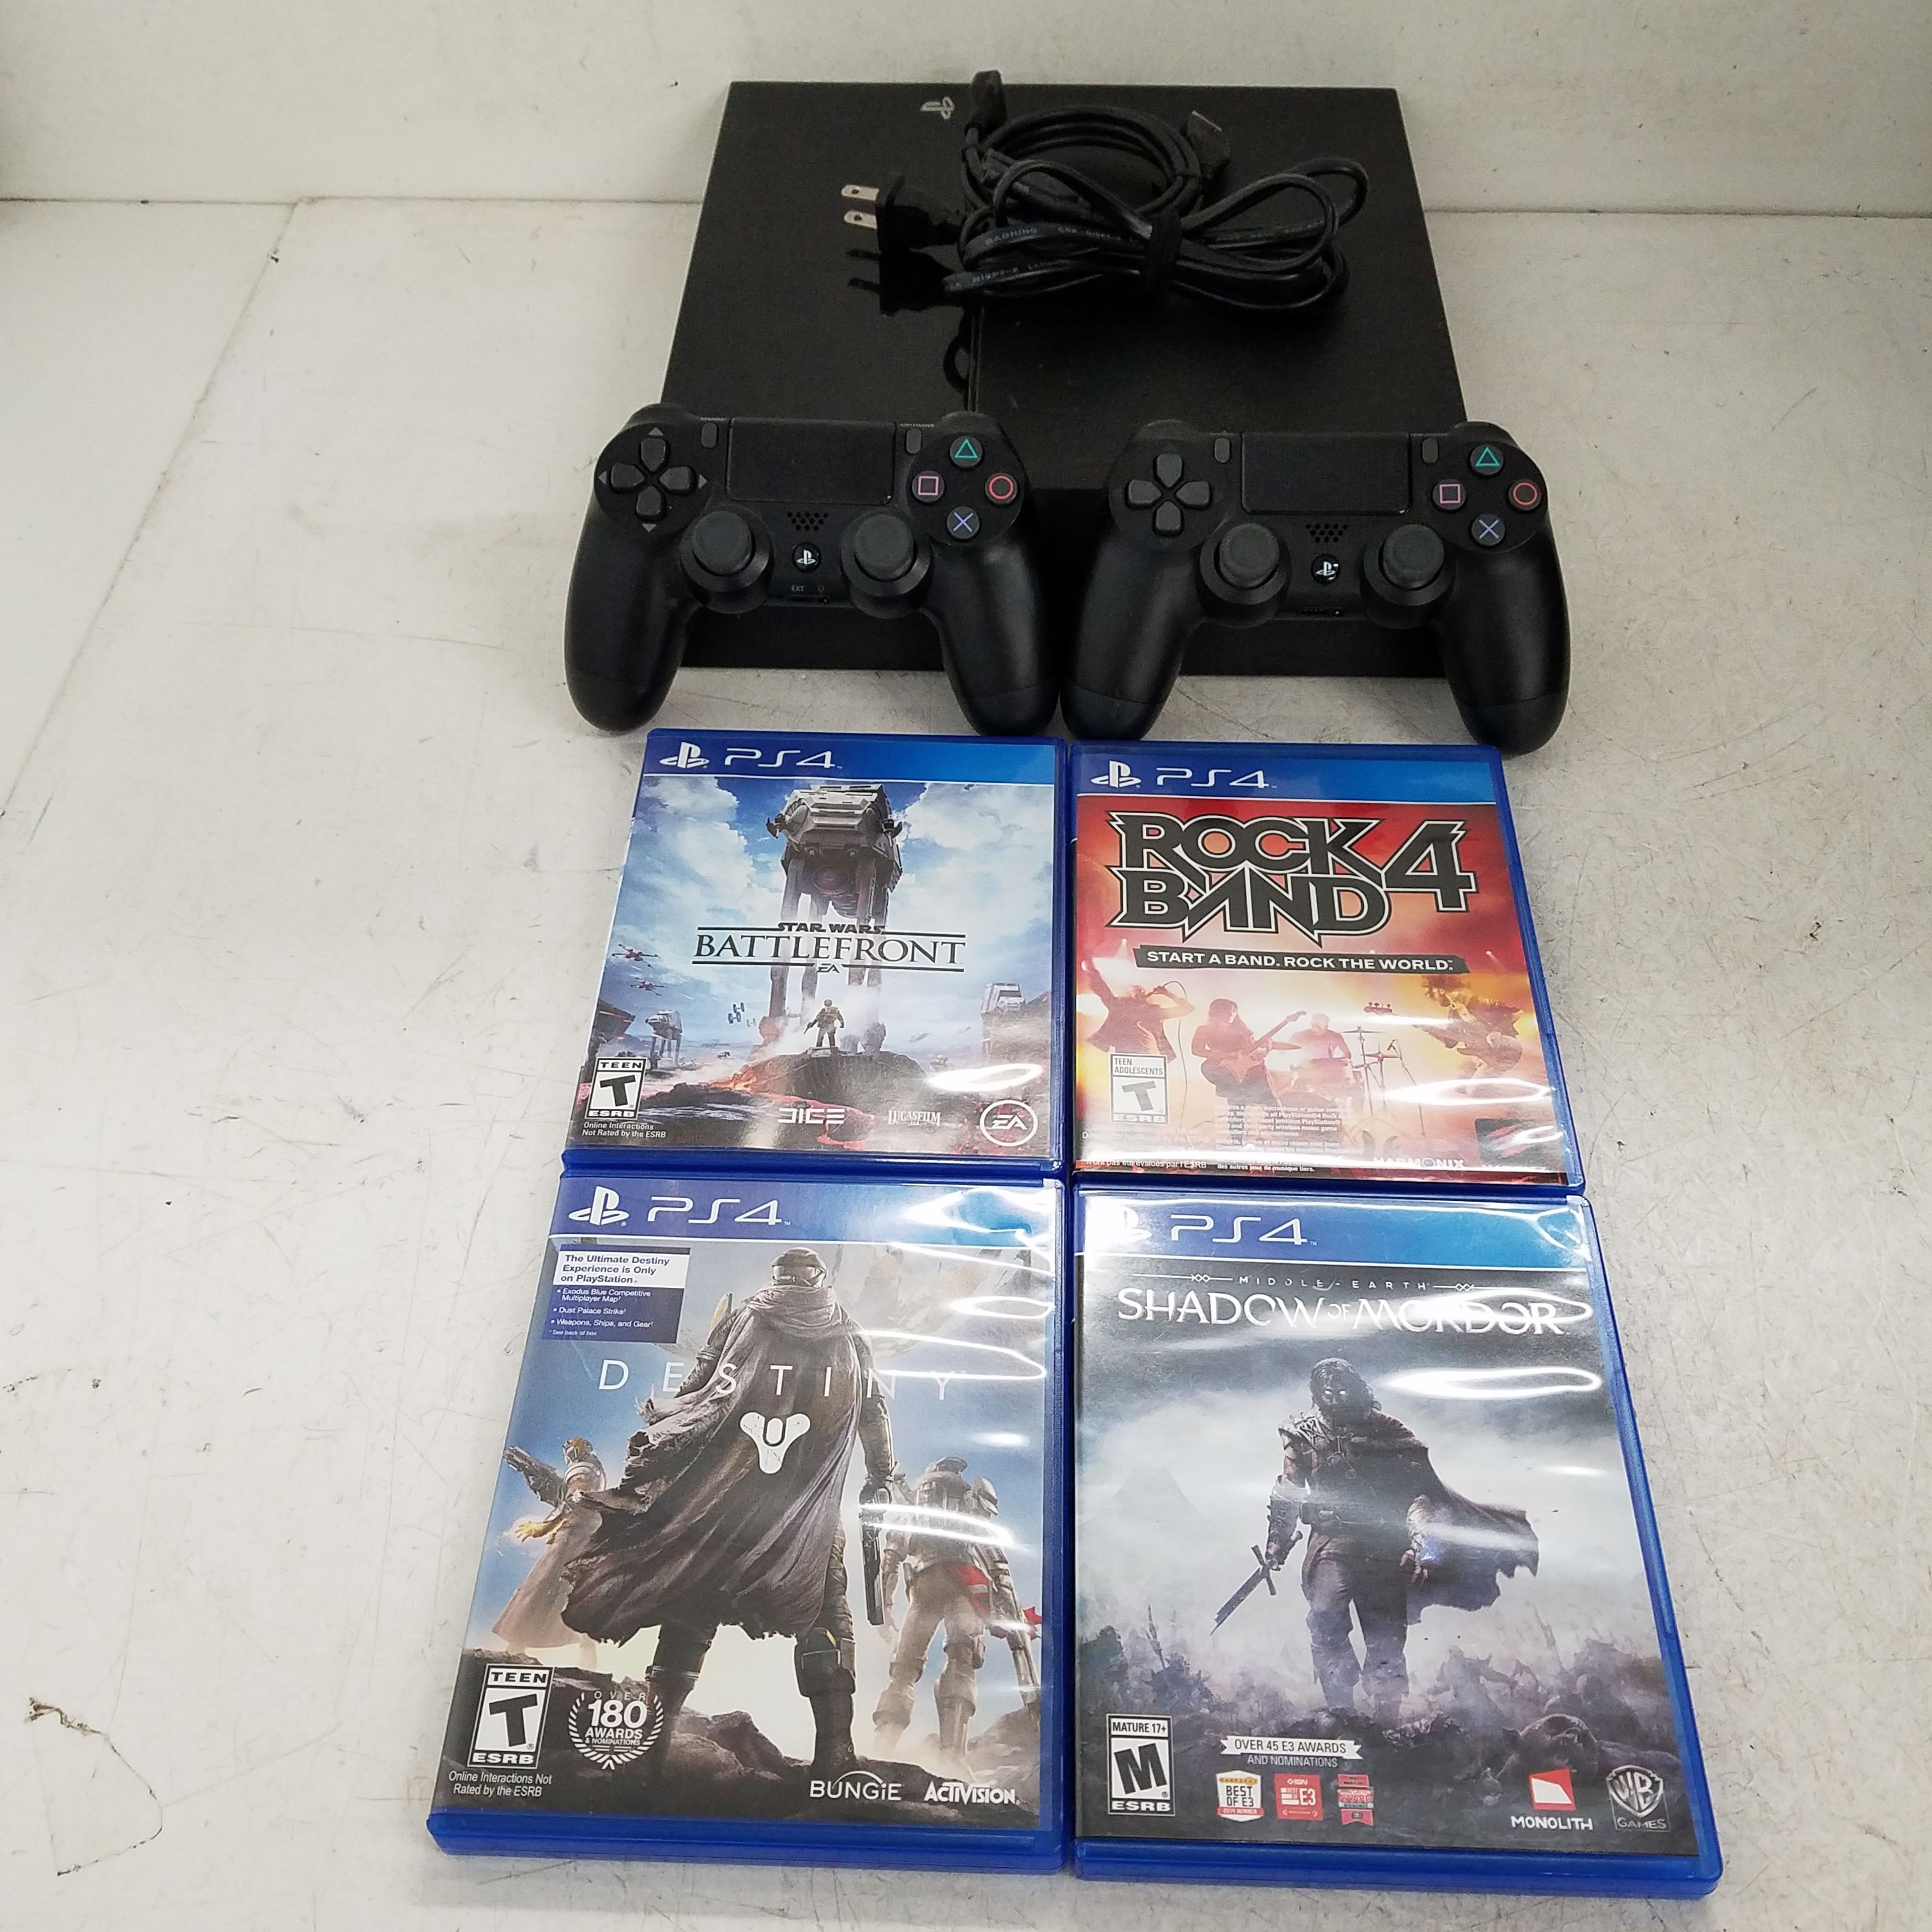 Sony PlayStation 4 500GB Game Console with GTA V and The Last of